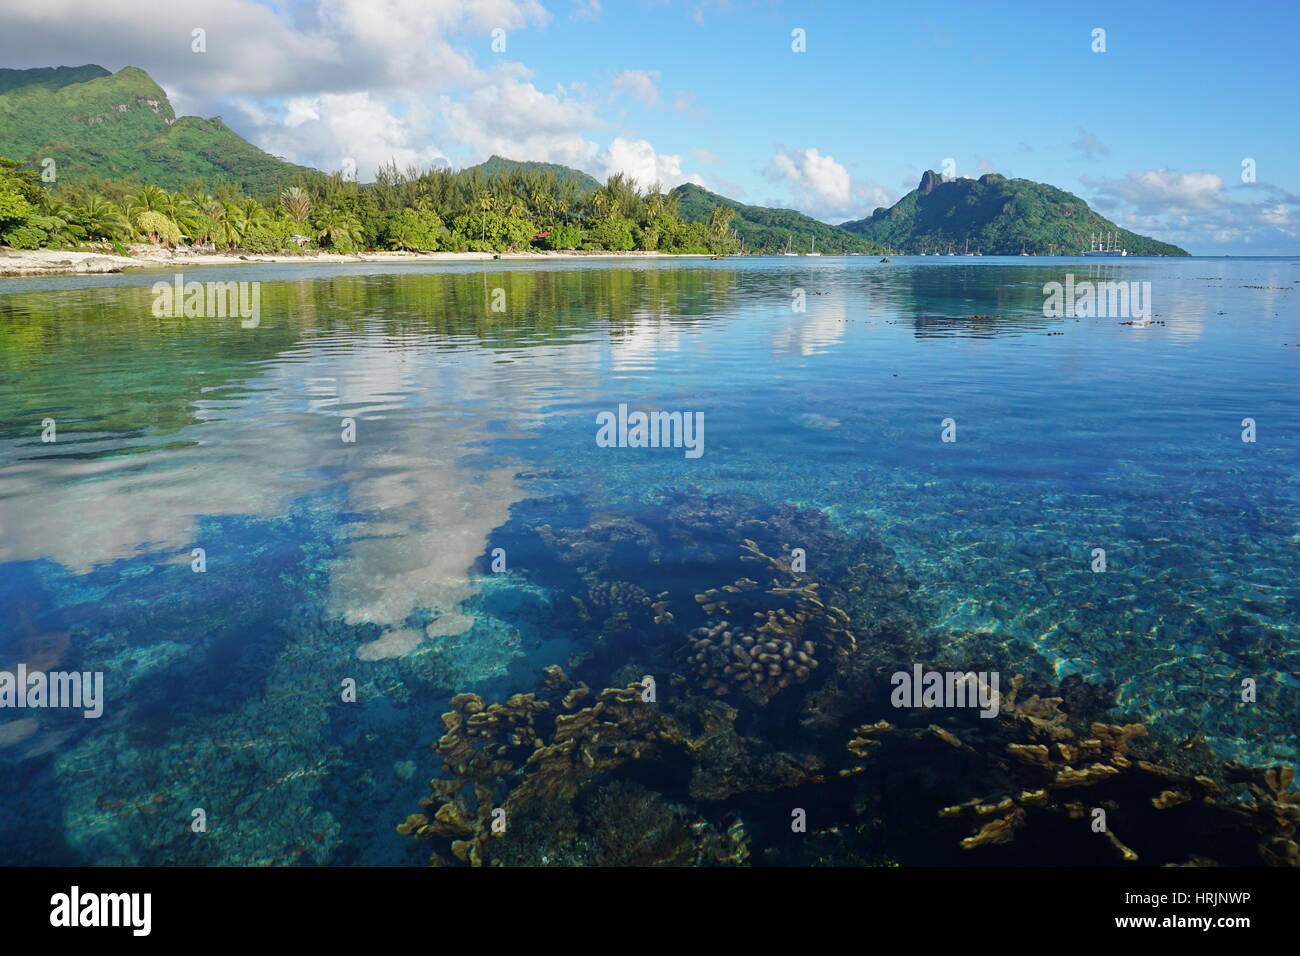 French Polynesia Huahine island coastal landscape seen from the lagoon with corals in shallow water below sea surface, south Pacific ocean Stock Photo